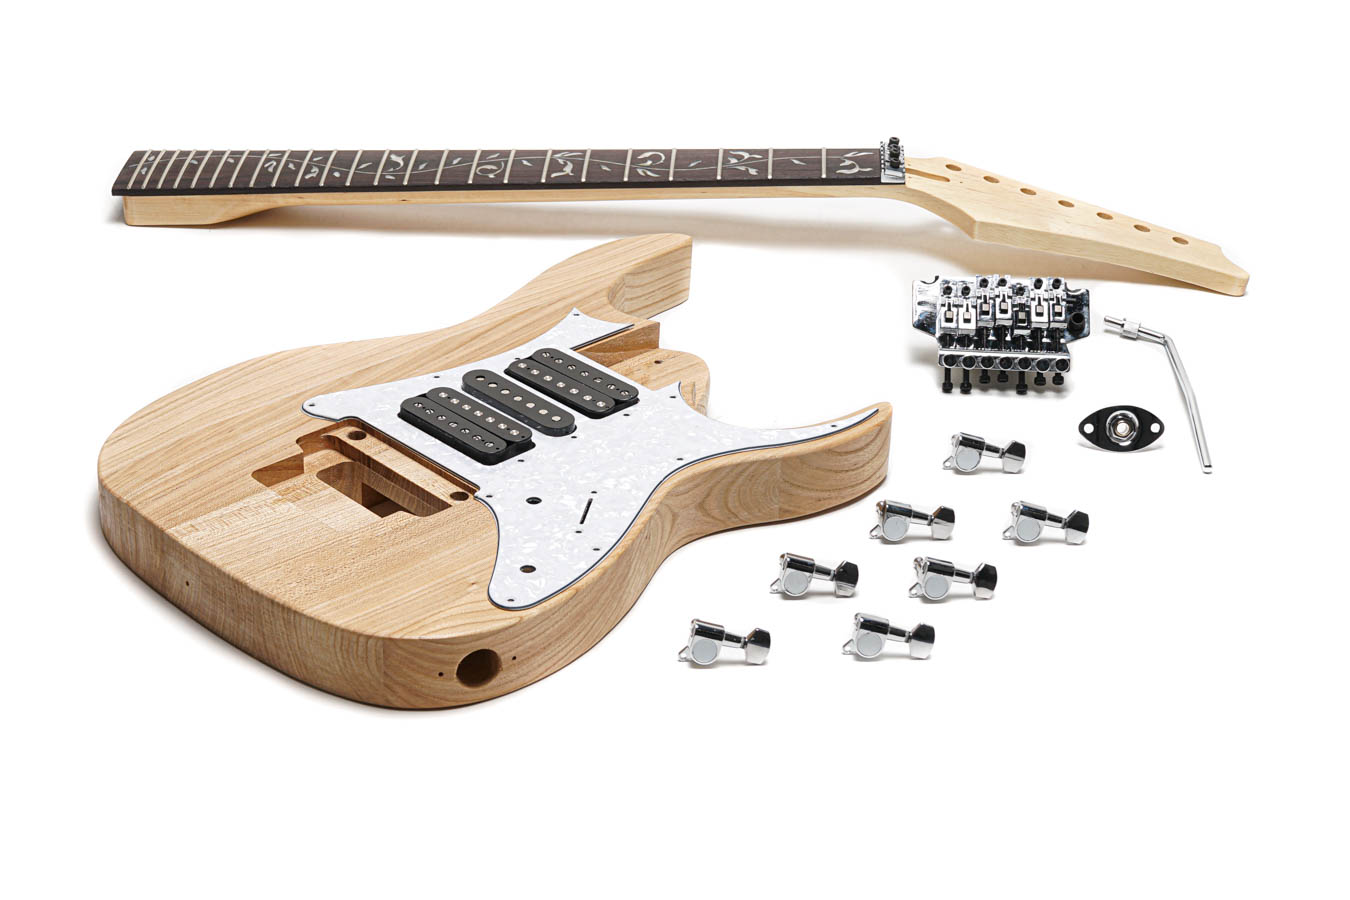 5 Reasons: Why Should You Gather a DIY Electric Guitar Kit?